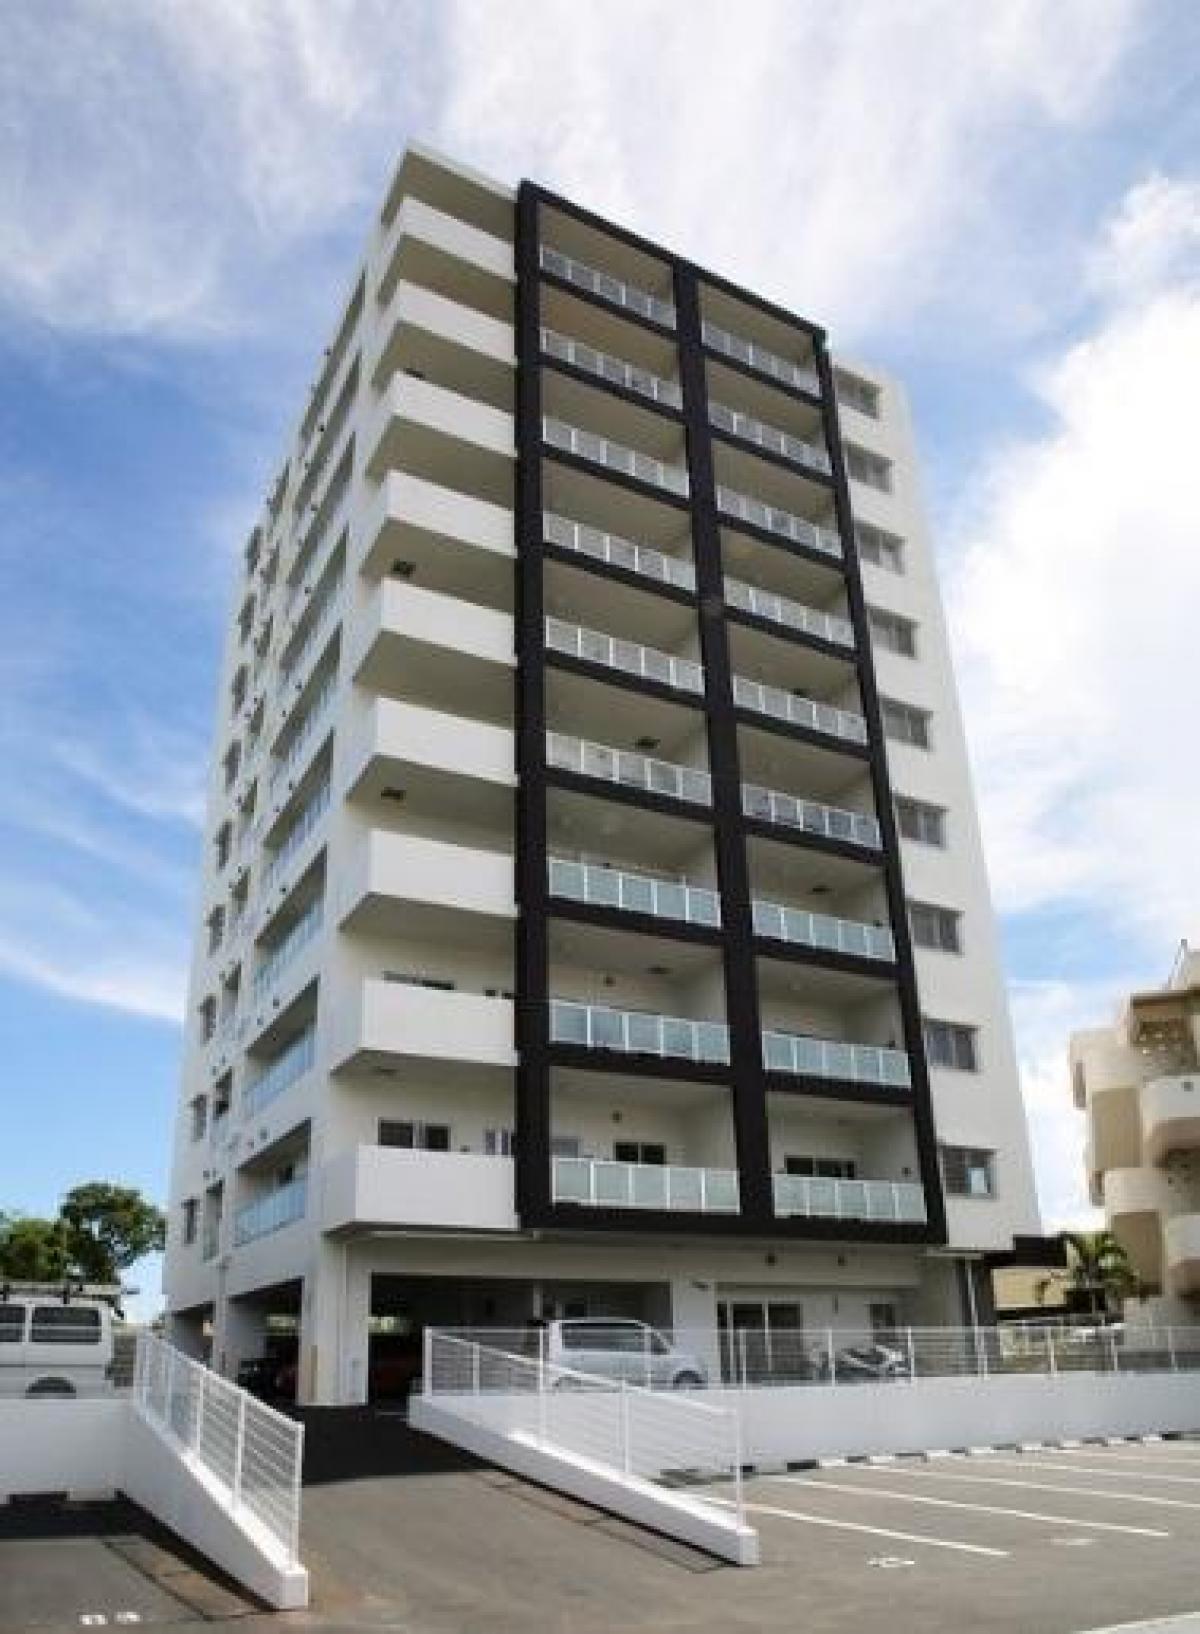 Picture of Apartment For Sale in Okinawa Shi, Okinawa, Japan